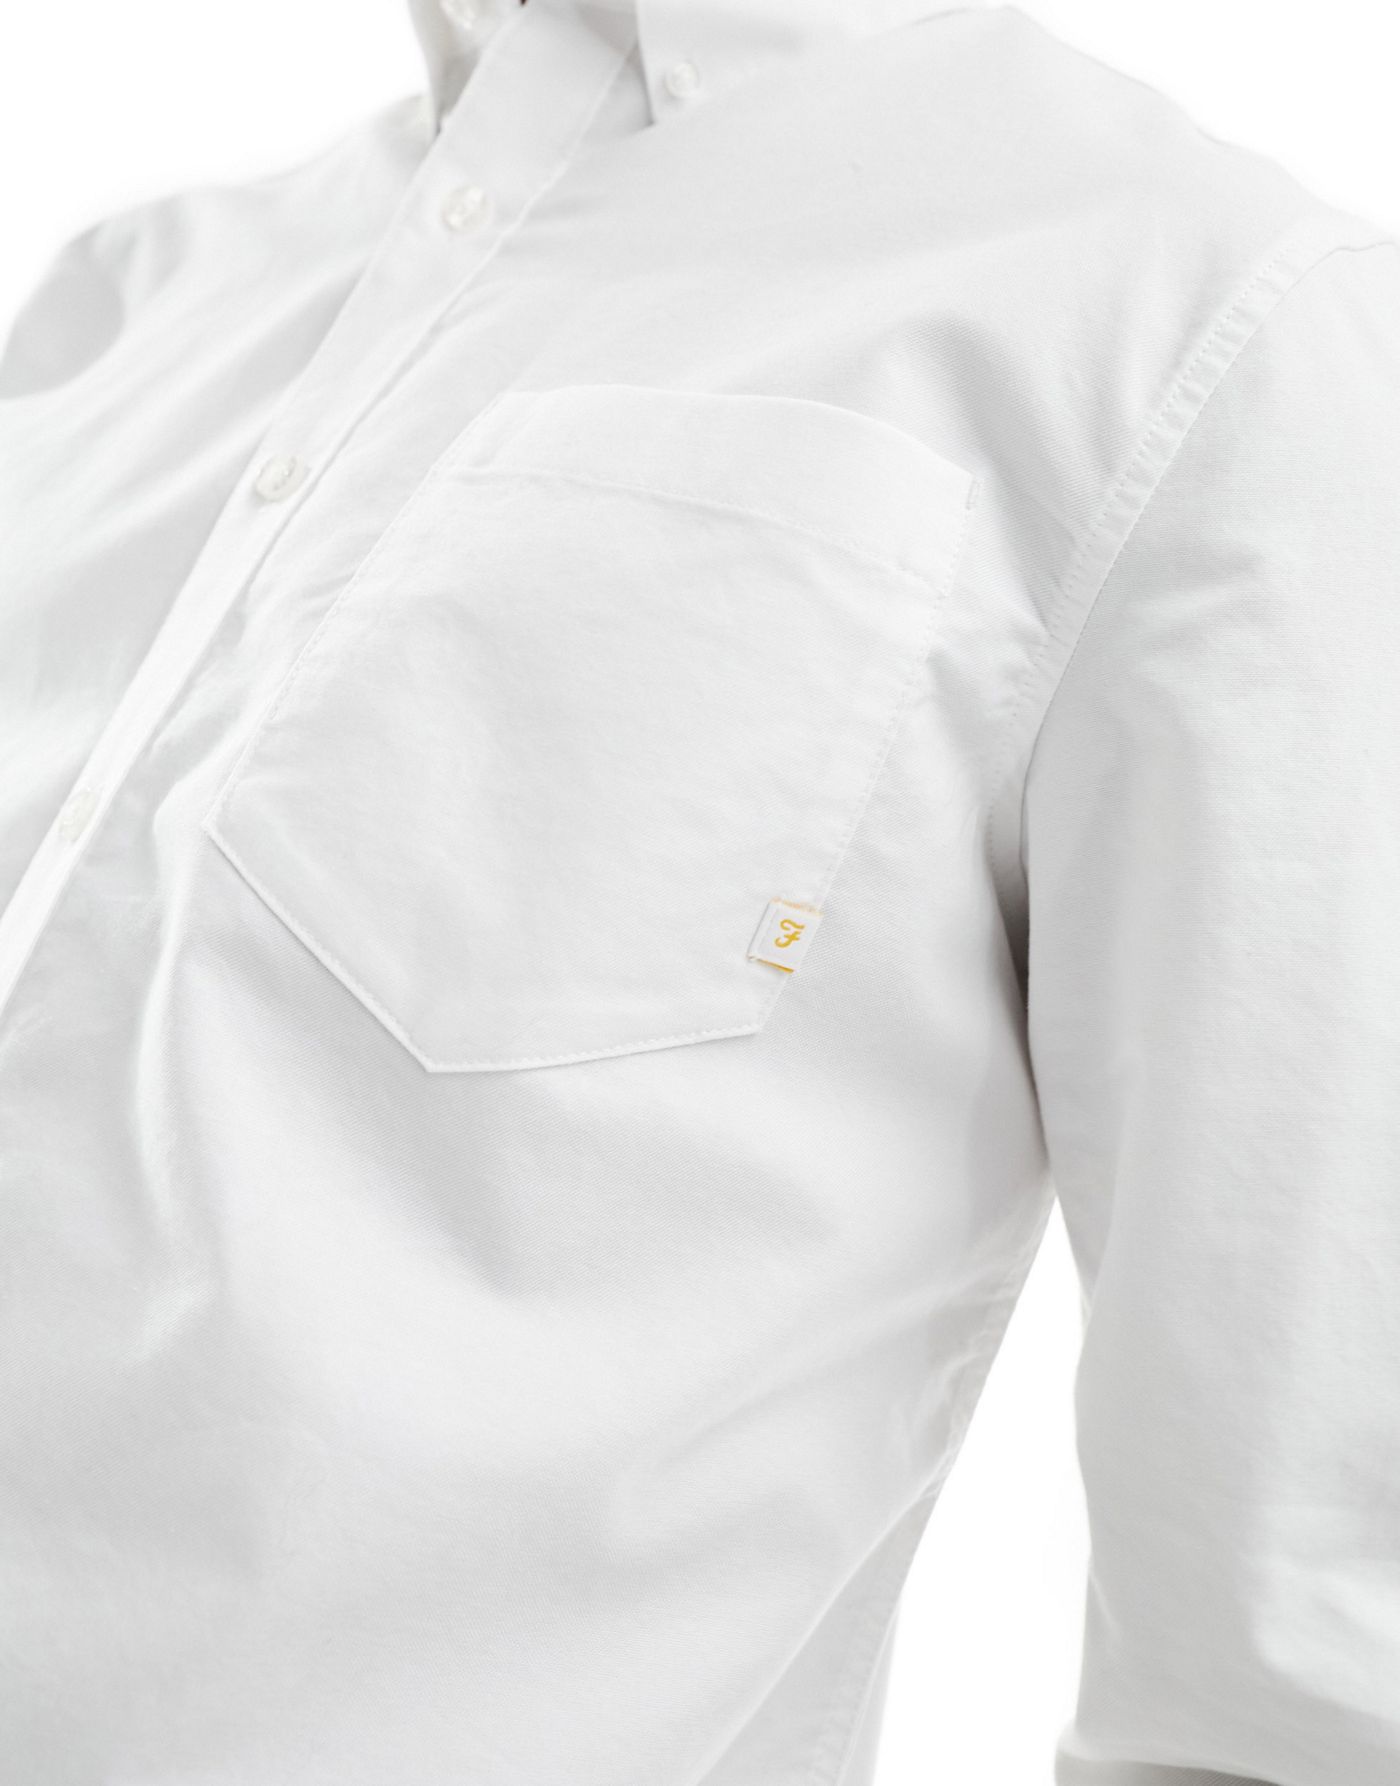 Farah brewer relaxed shirt in white